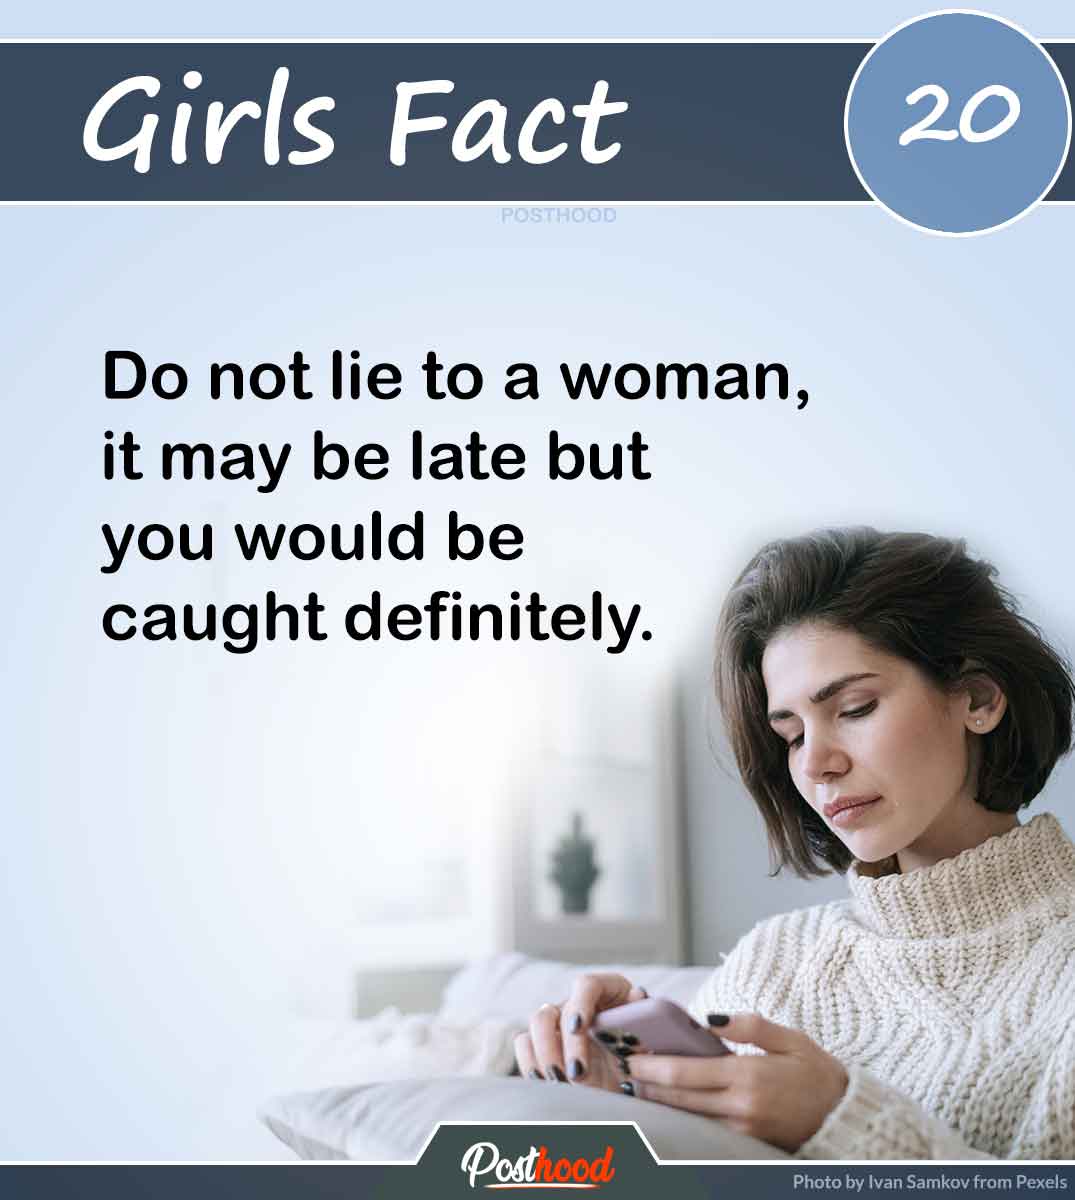 Know amazing psychological tricks women use to catch your lie. These amazing girls facts will help you to know her more.